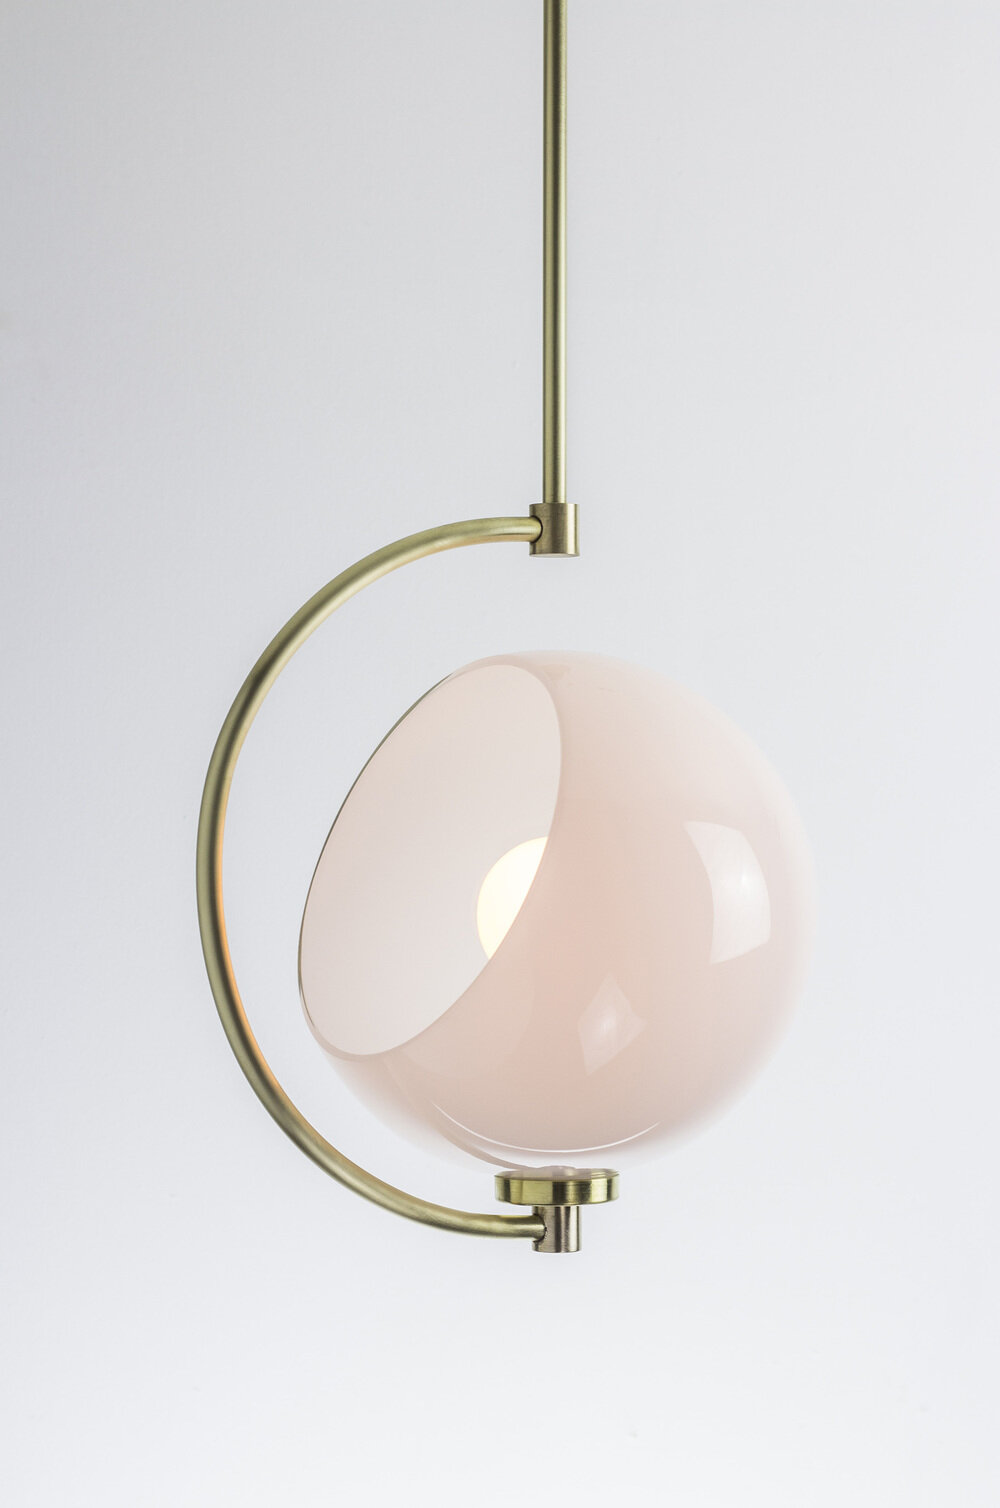 Pendant lamp with brass holder and cutaway glass globe.